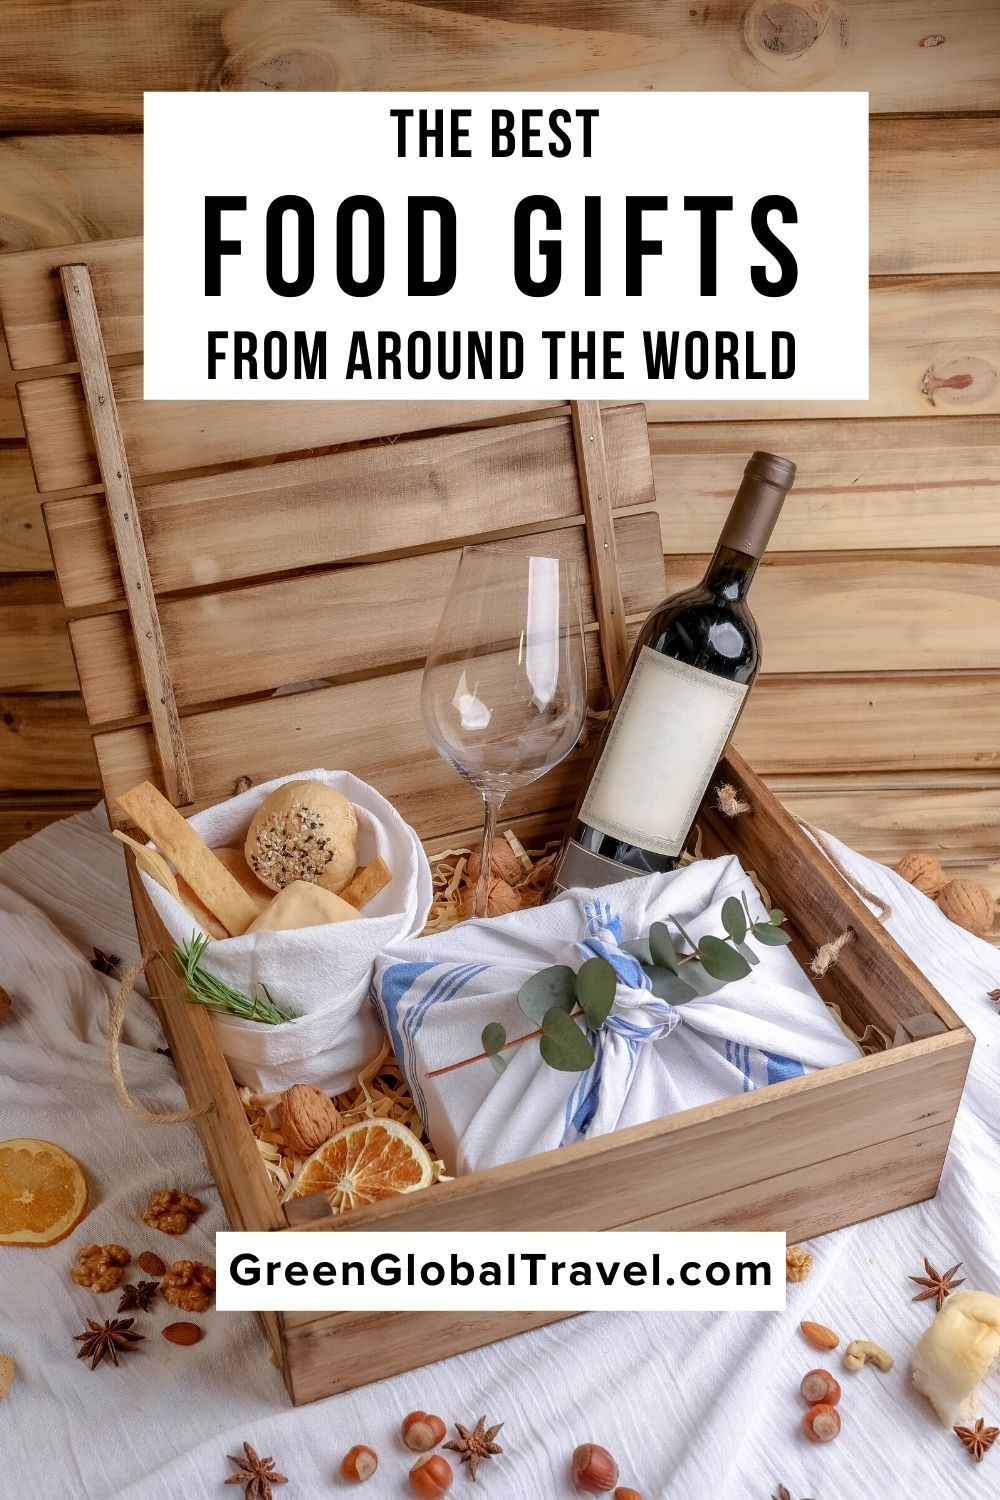 The Best Food Gifts From Around the World (The Ultimate Gourmet Guide) includes Baked Goods Gift Baskets, Chocolate Gift Boxes, Coffee Gift Sets, Tea Gift Sets, Prepared Food Gifts, Vegetarian/Vegan Food Gifts, Meat Gifts and more! | food gifts for men | best foodie gifts | food presents | foodie gifts for christmas | monthly food subscription boxes | gourmet foodie gifts | foodie gifts | foodie gift basket | gifts for foodies | snack gift box  | foodie subscriptions | best gifts for foodies